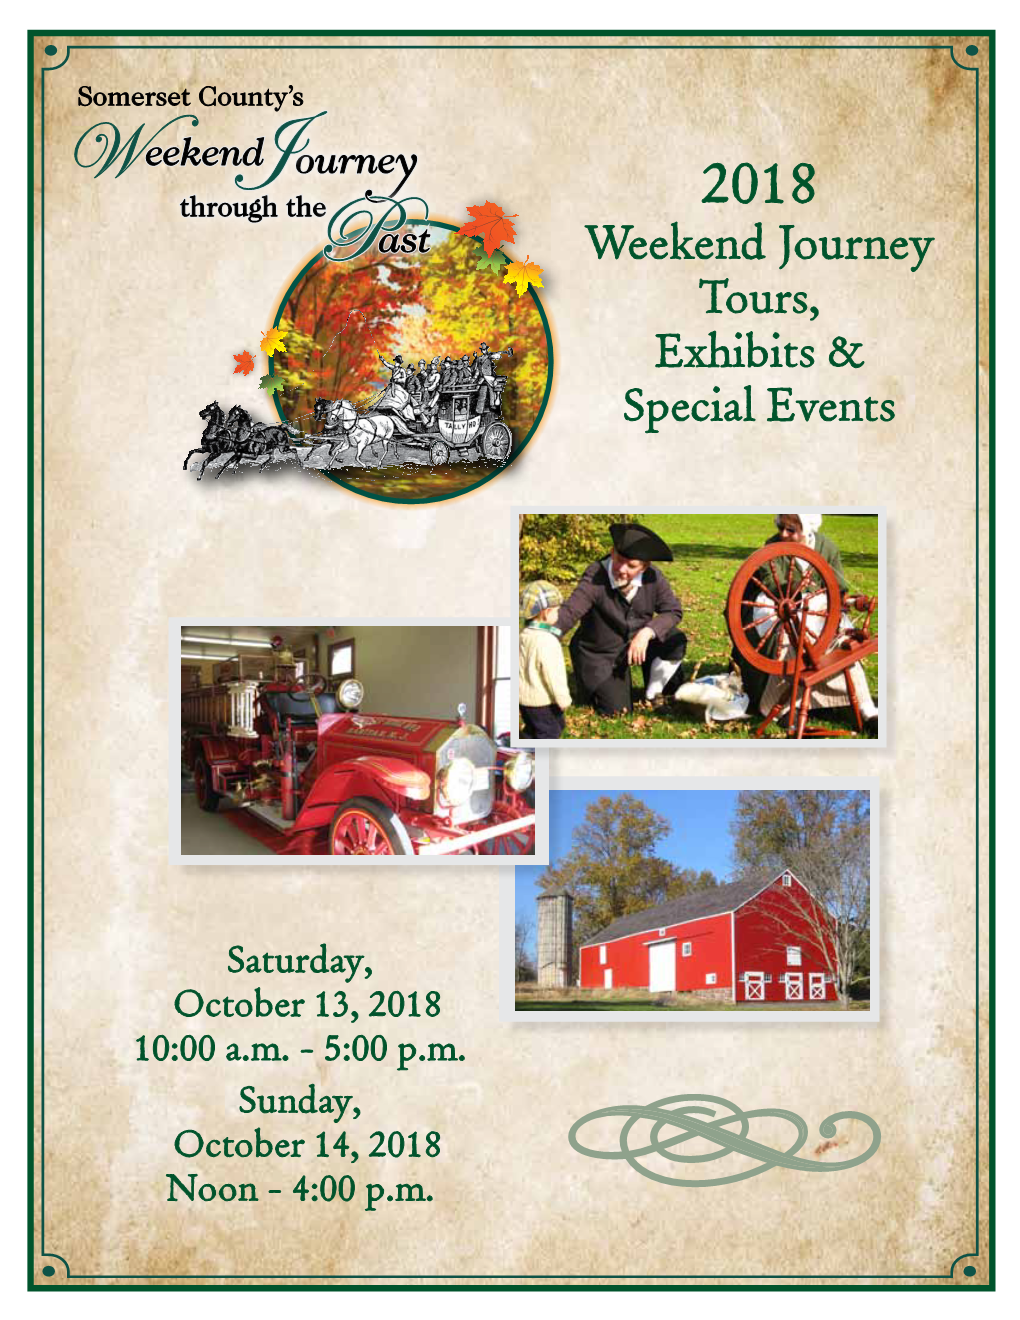 Weekend Journey Tours, Exhibits & Special Events